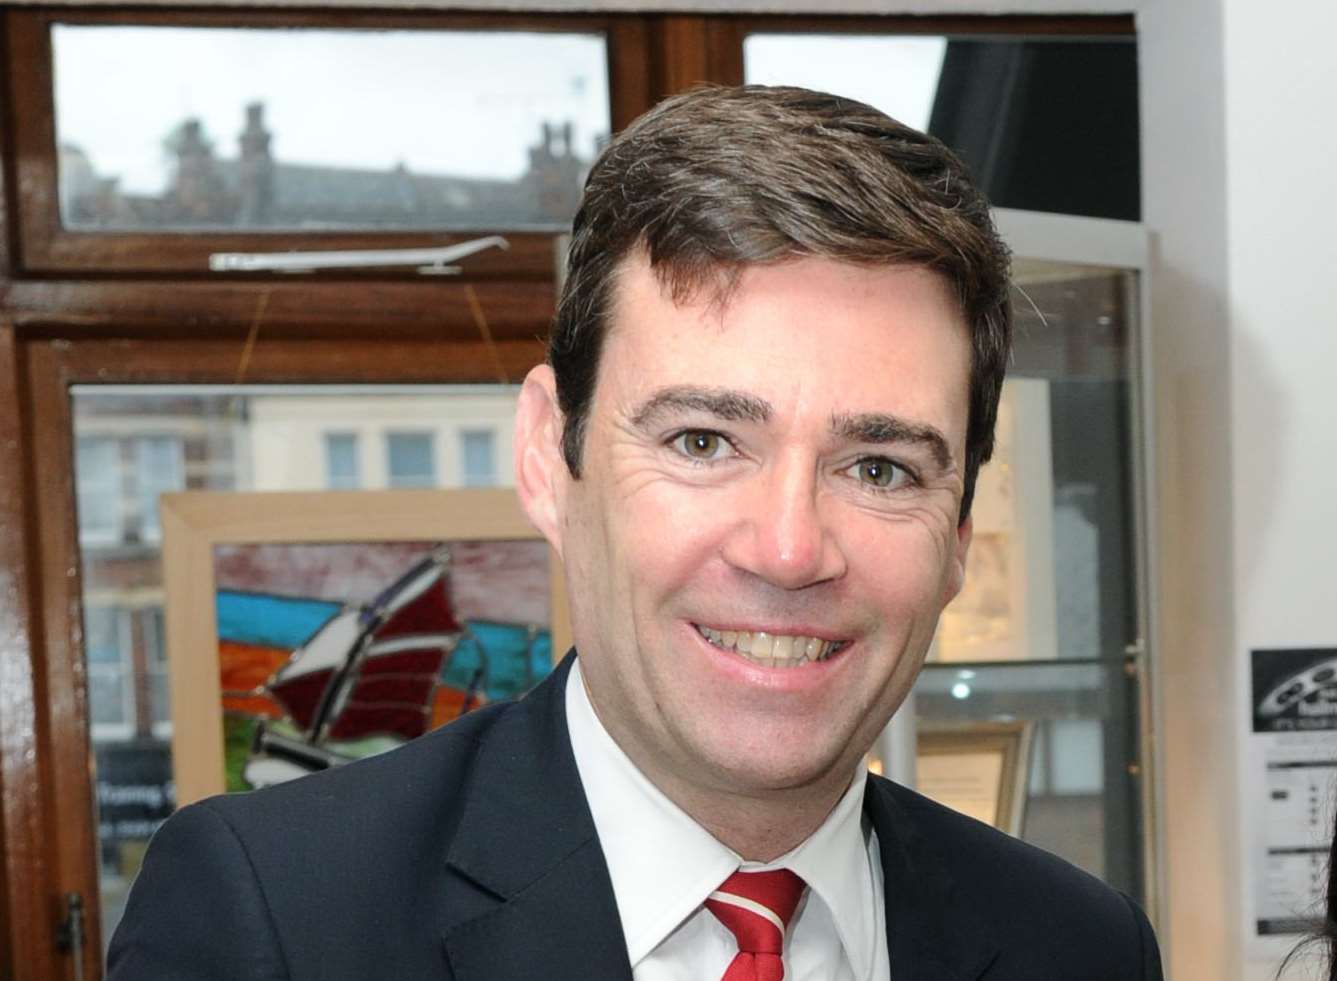 Andy Burnham, candidate for the Labour leadership, visited Medway in November.